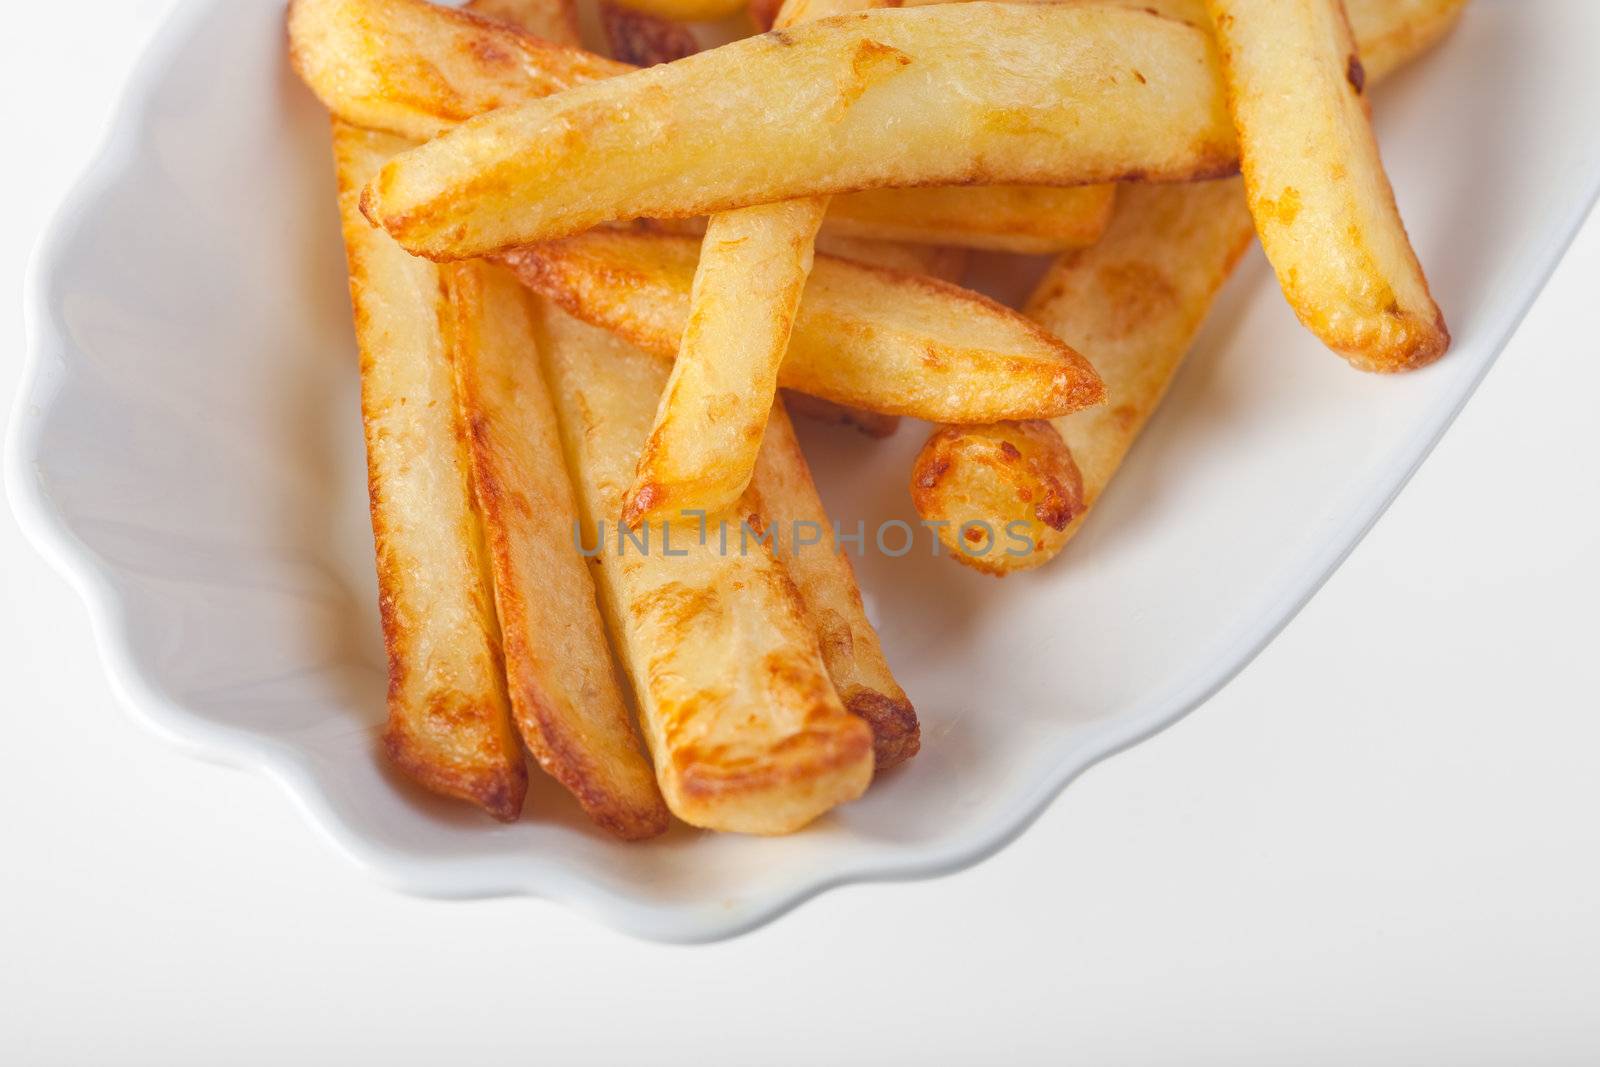 french fries on a typical plate by bernjuer